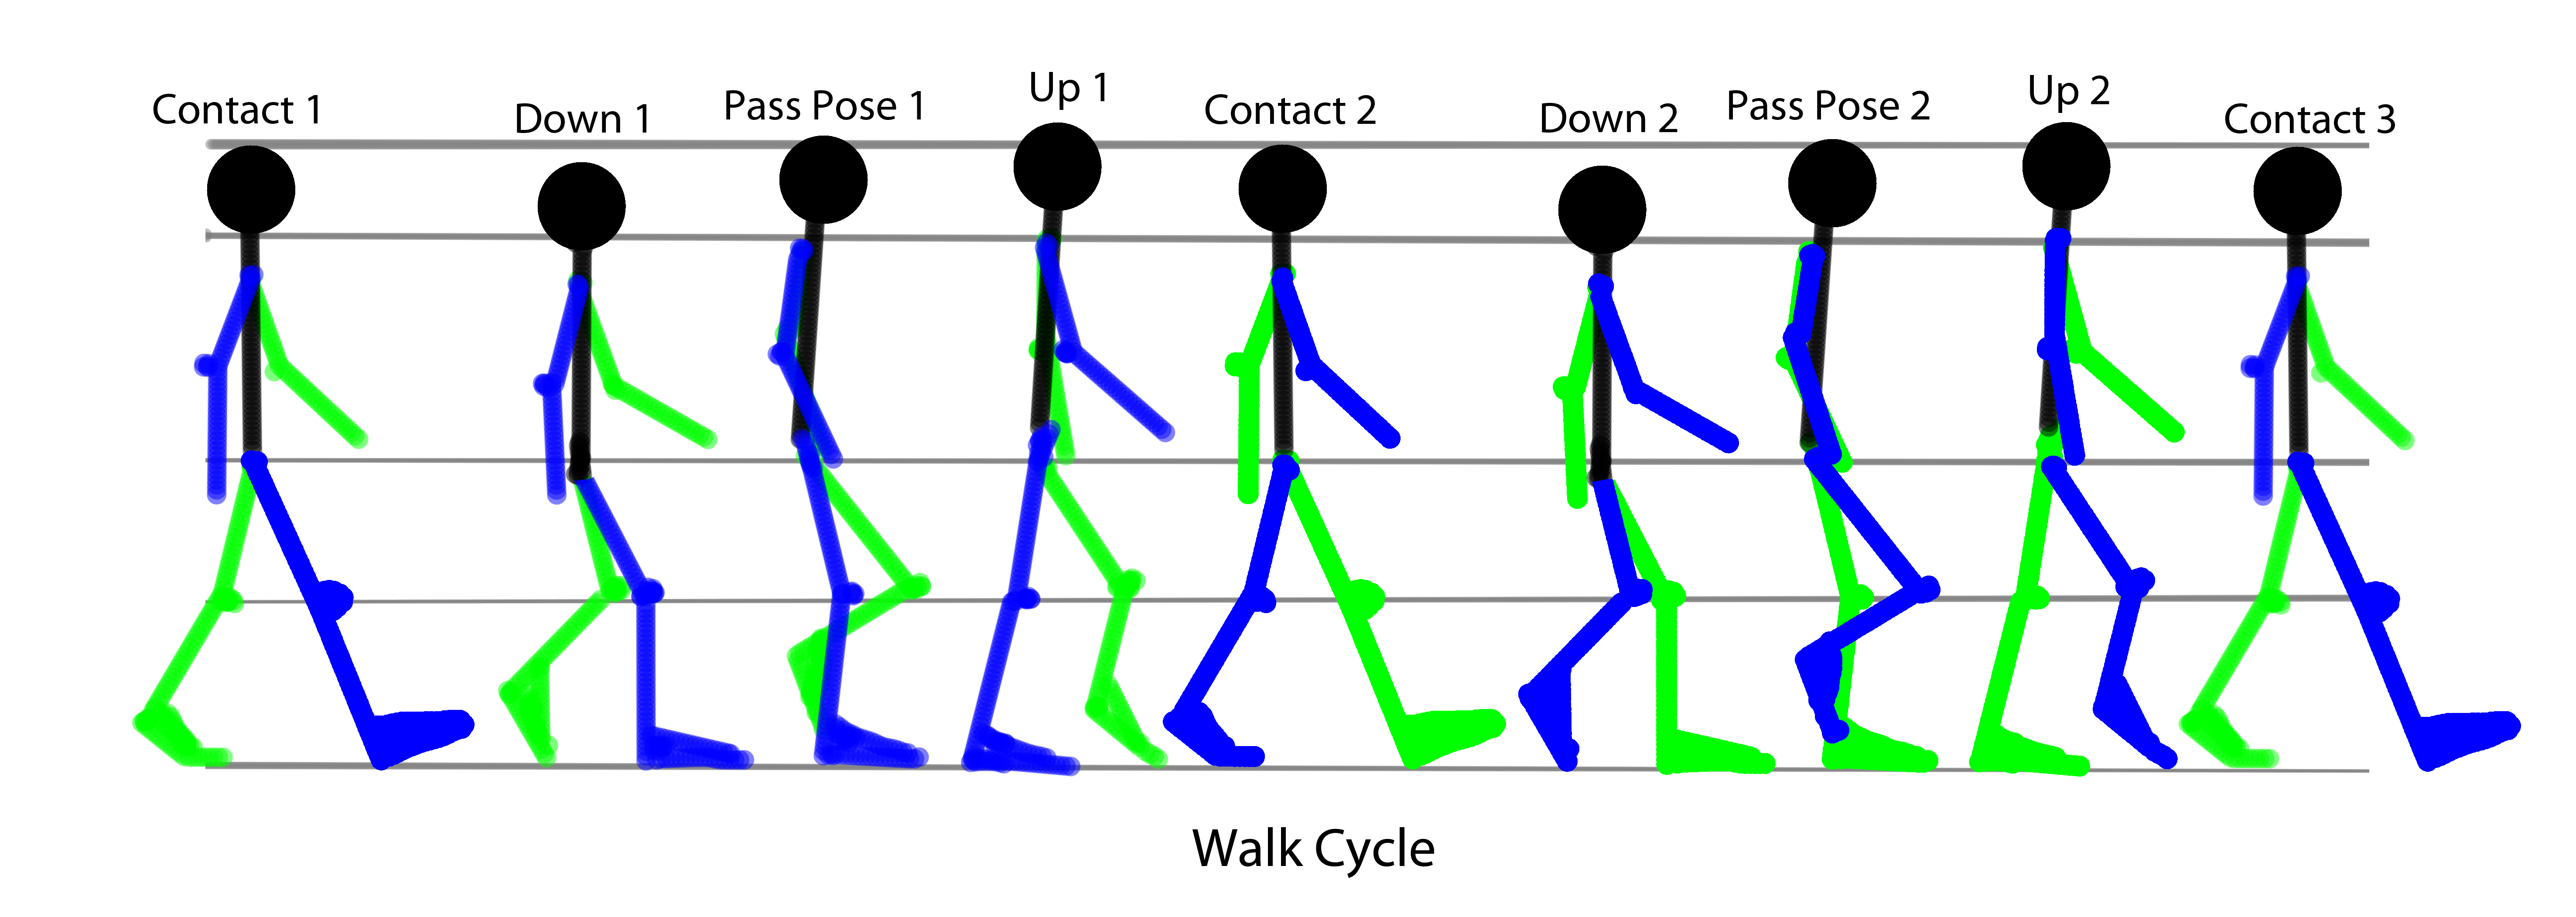 Walk cycle png images | PNGEgg